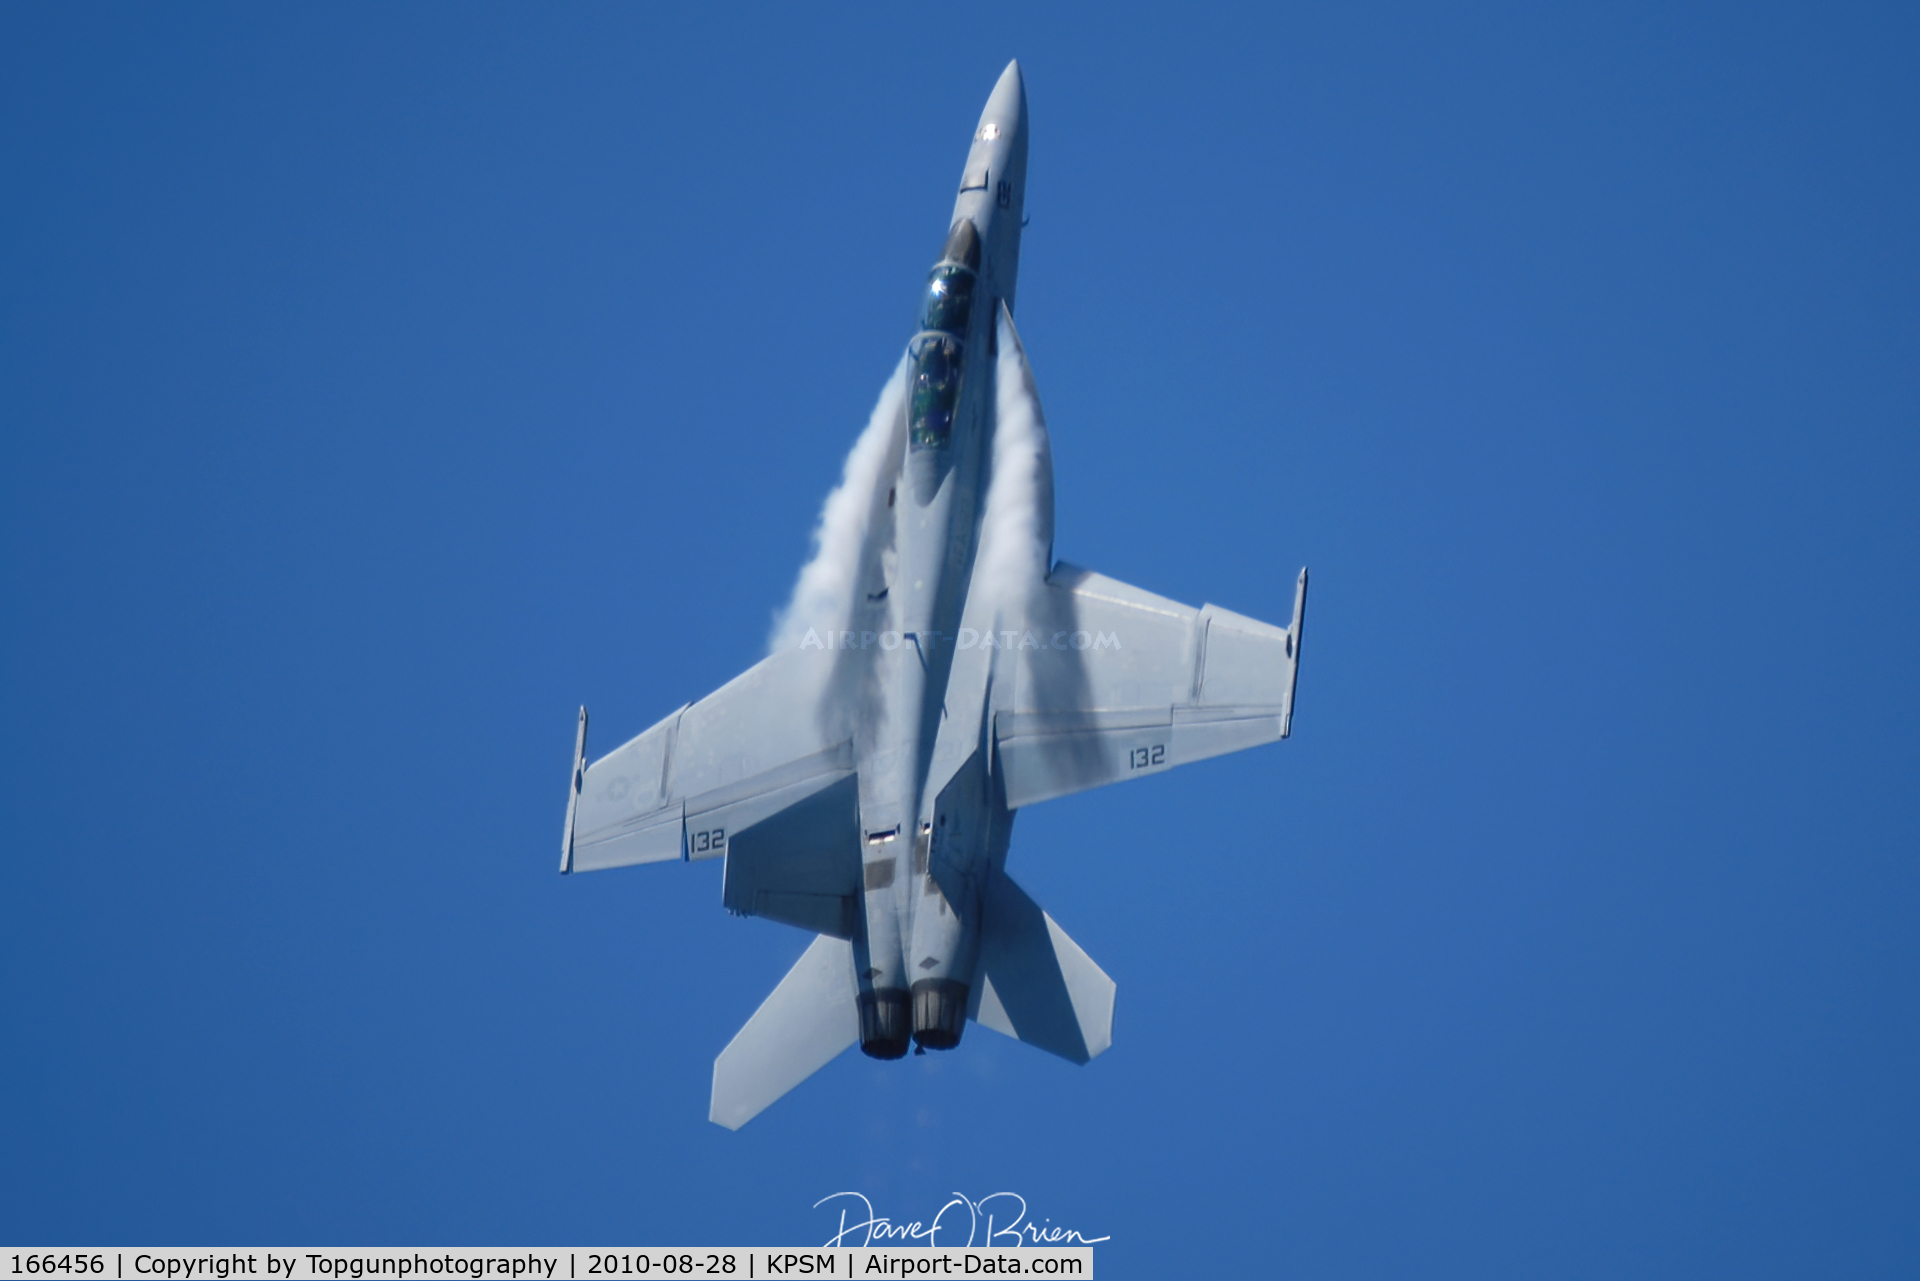 166456, Boeing F/A-18F Super Hornet C/N F091, climbing to the moon